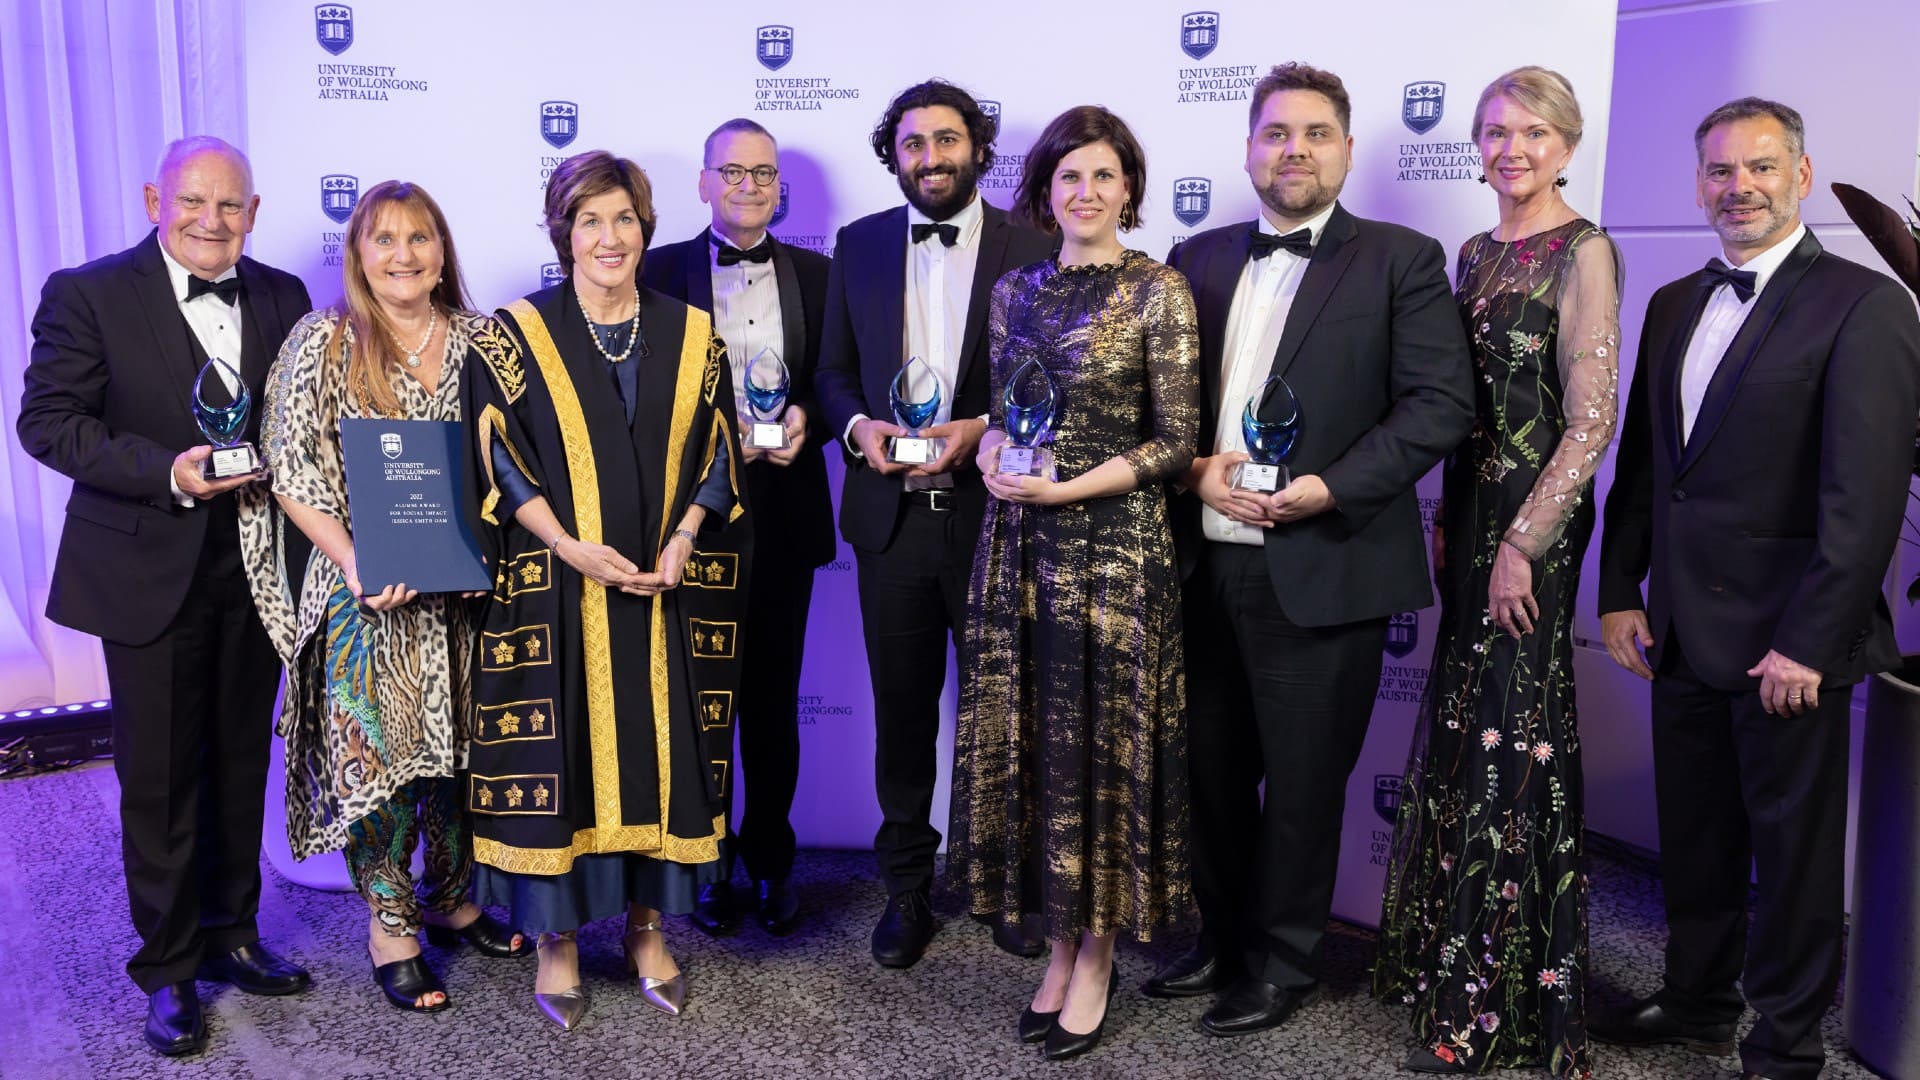 Winners of the UOW Alumni Awards stand with UOW Chancellor Christine McLoughlin. Photo: Mark Newsham